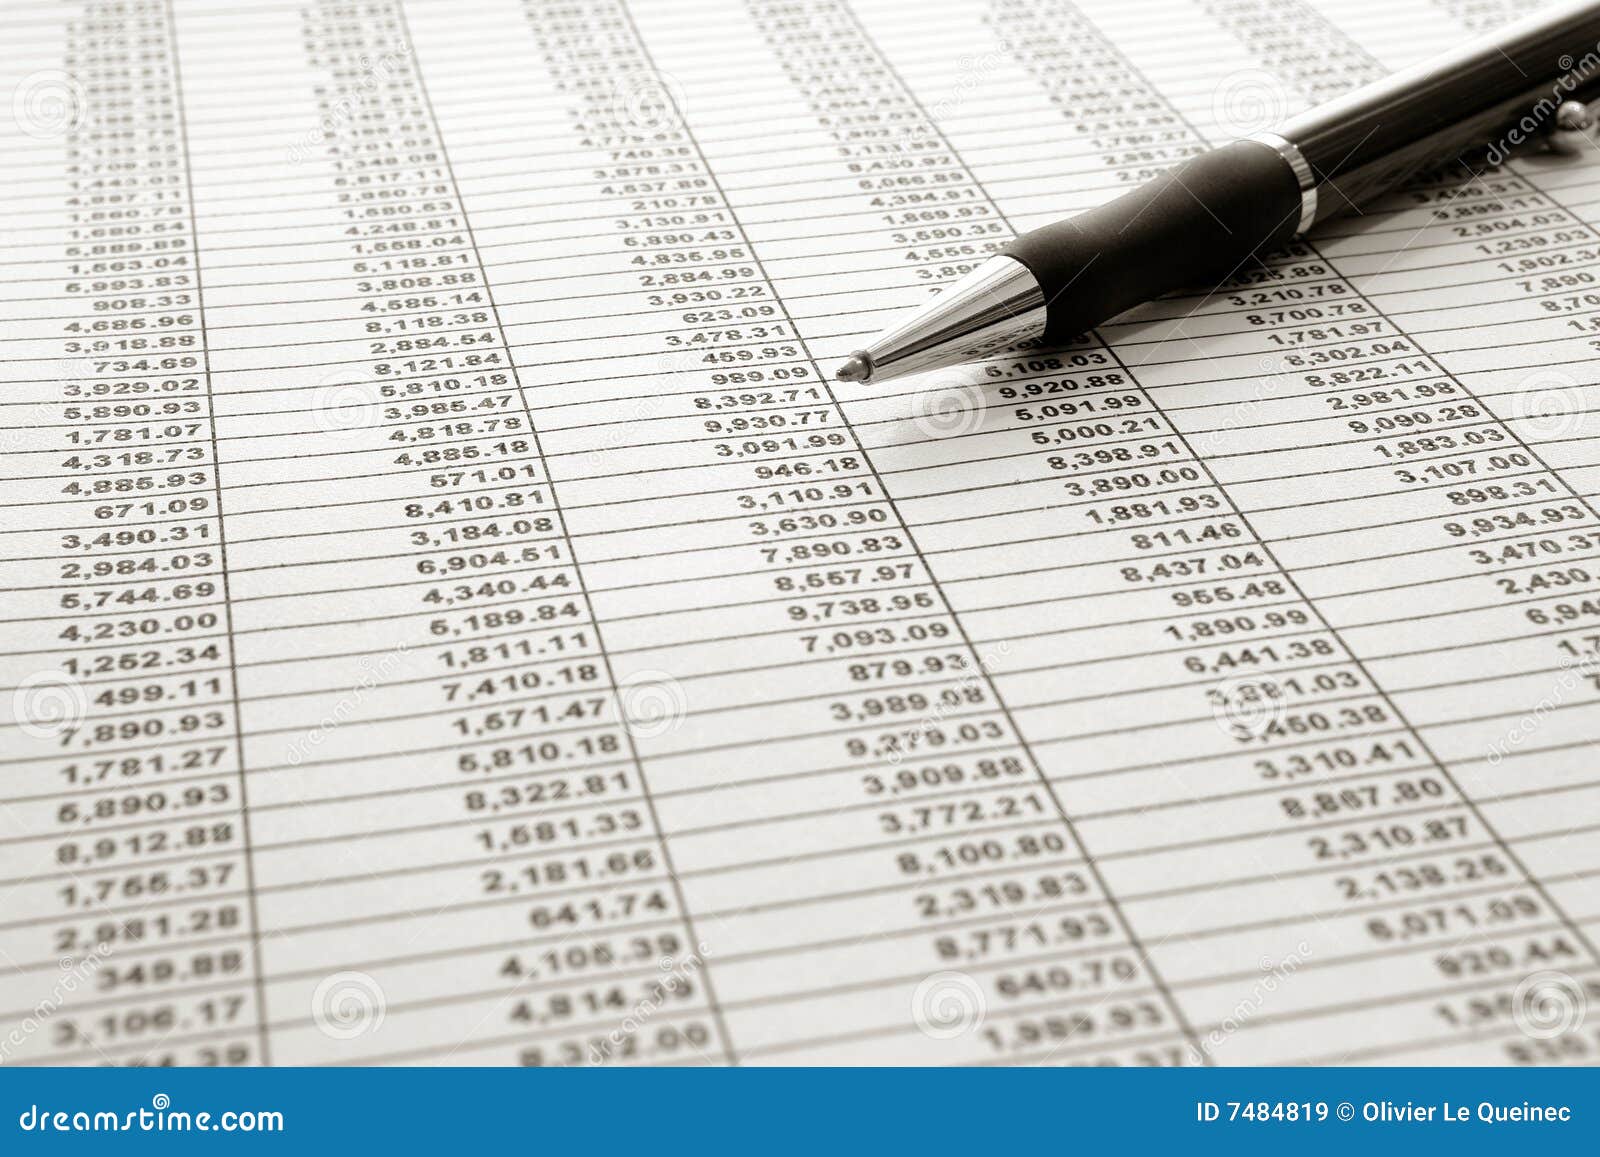 Financial Spreadsheet And Ballpoint Ink Pen Stock Image - Image of finance, balancing ...